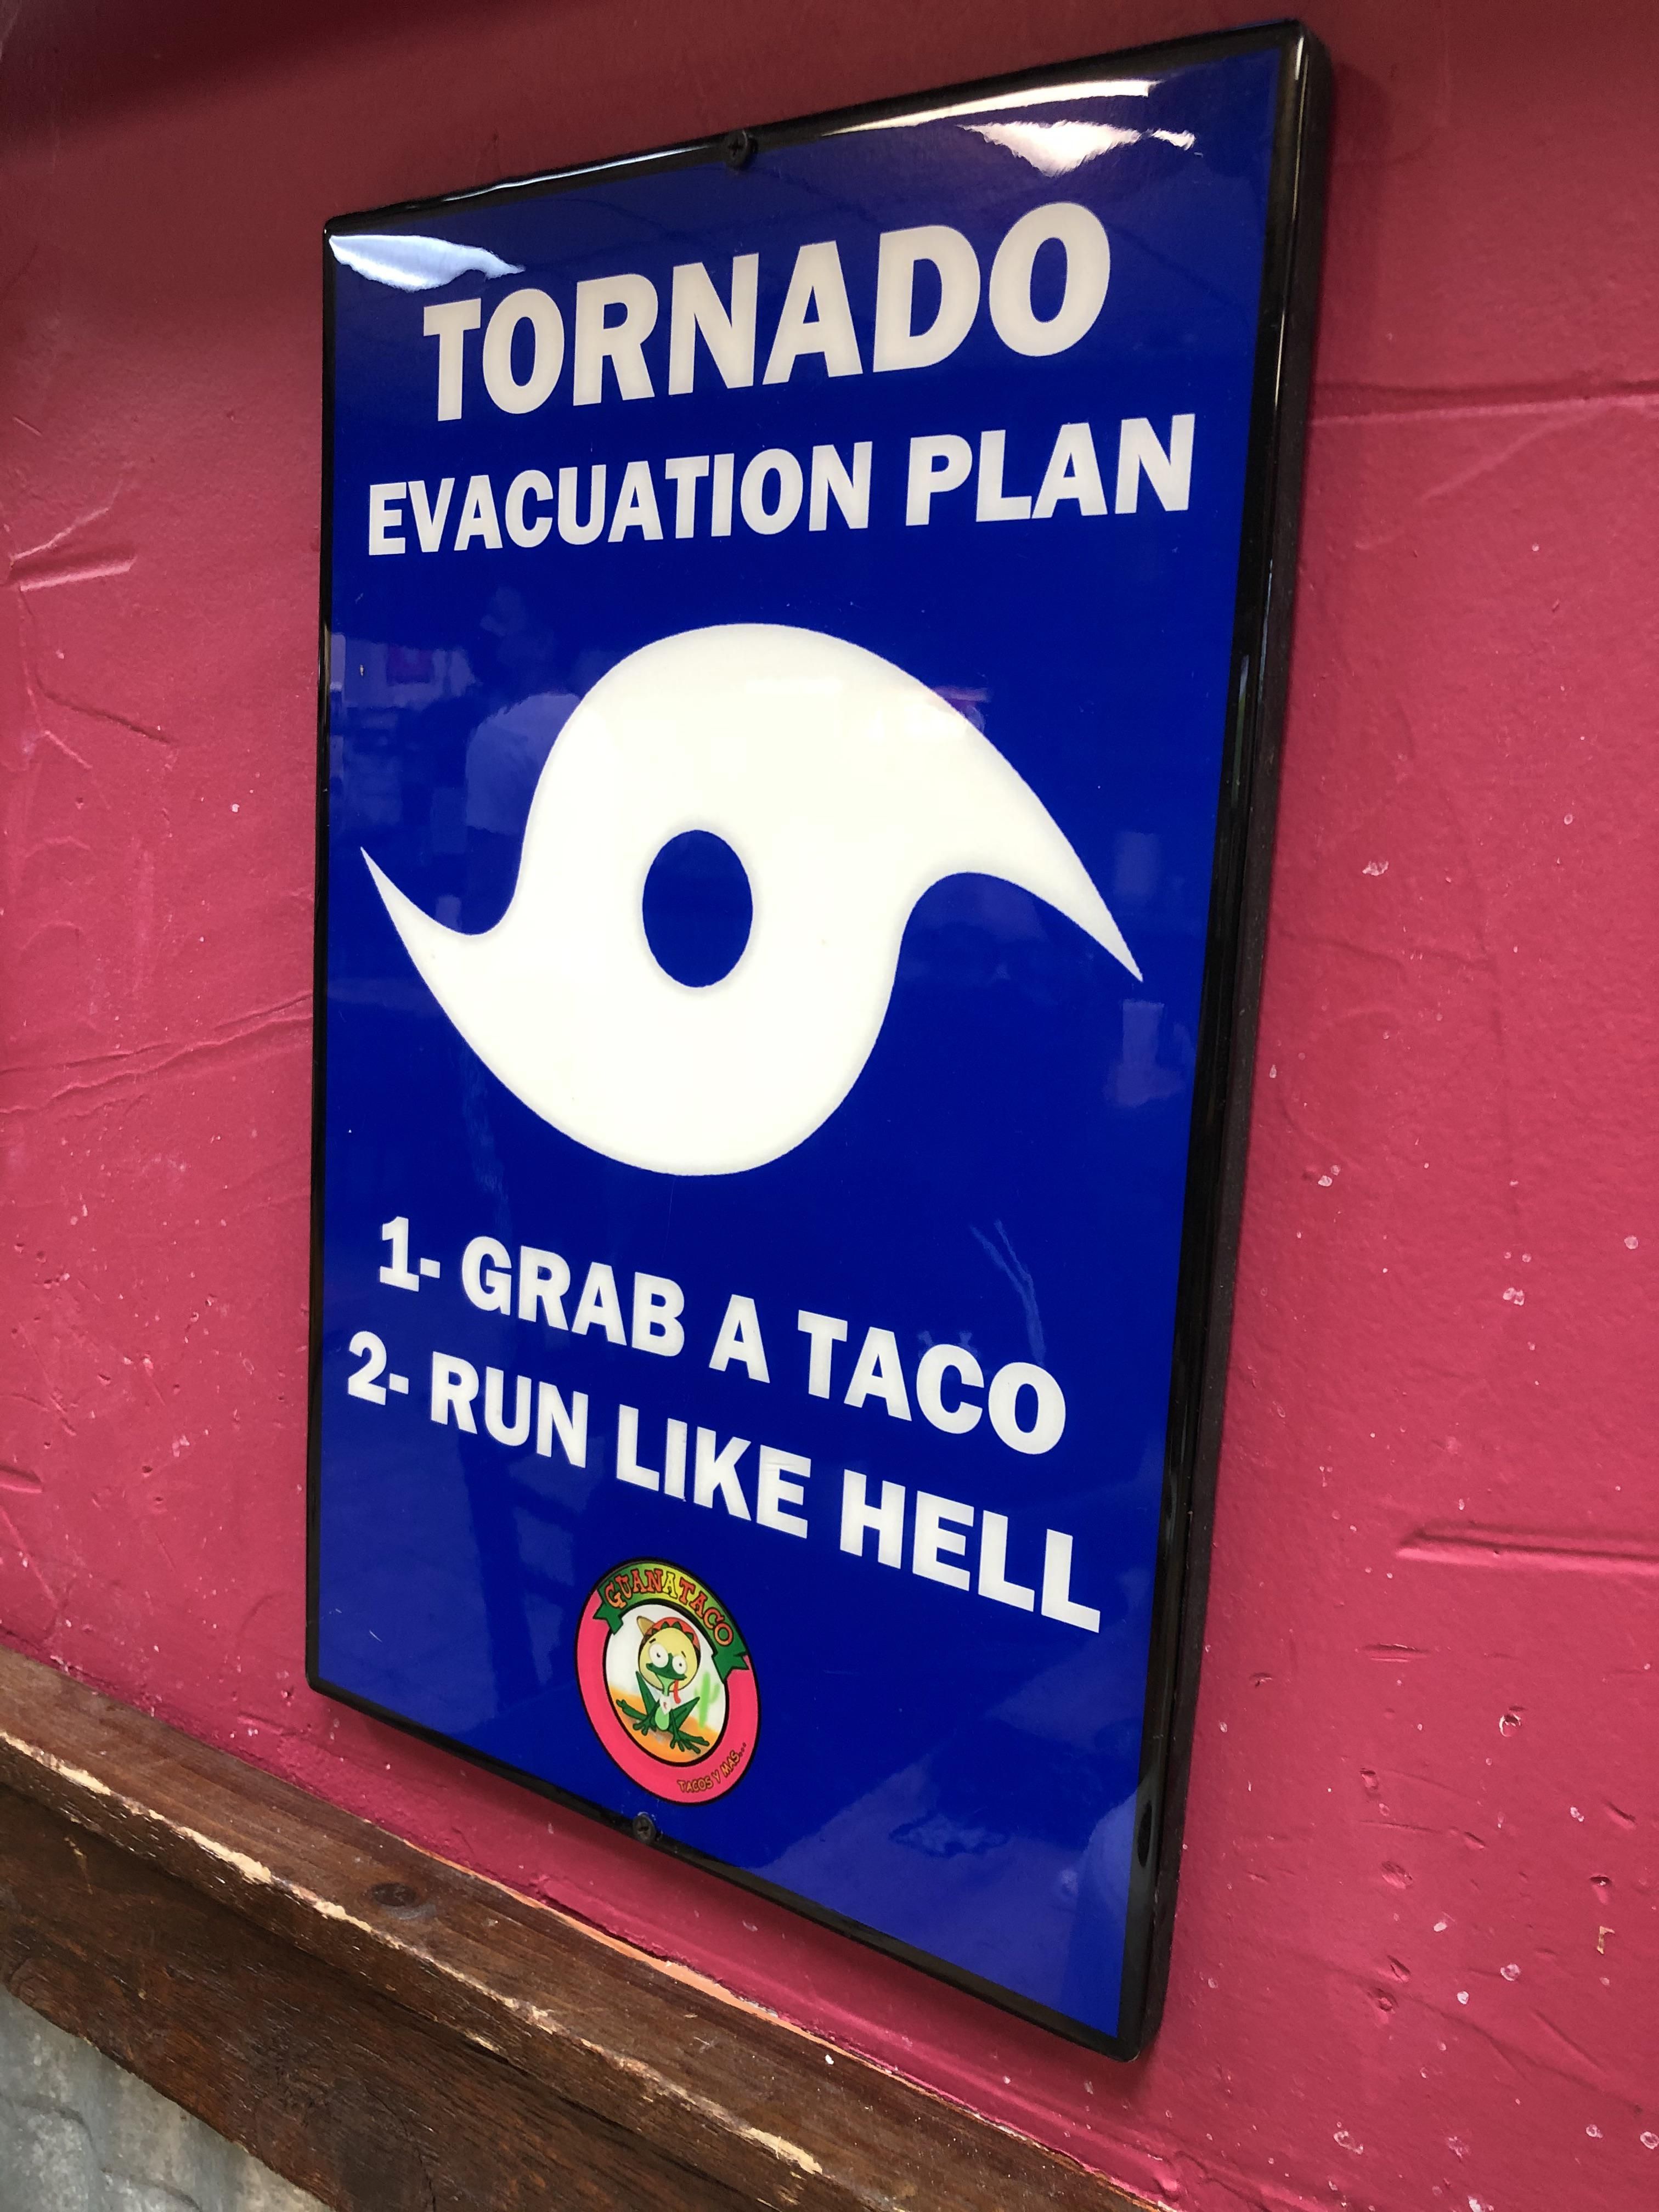 A sign at a local hole in the wall Taco place